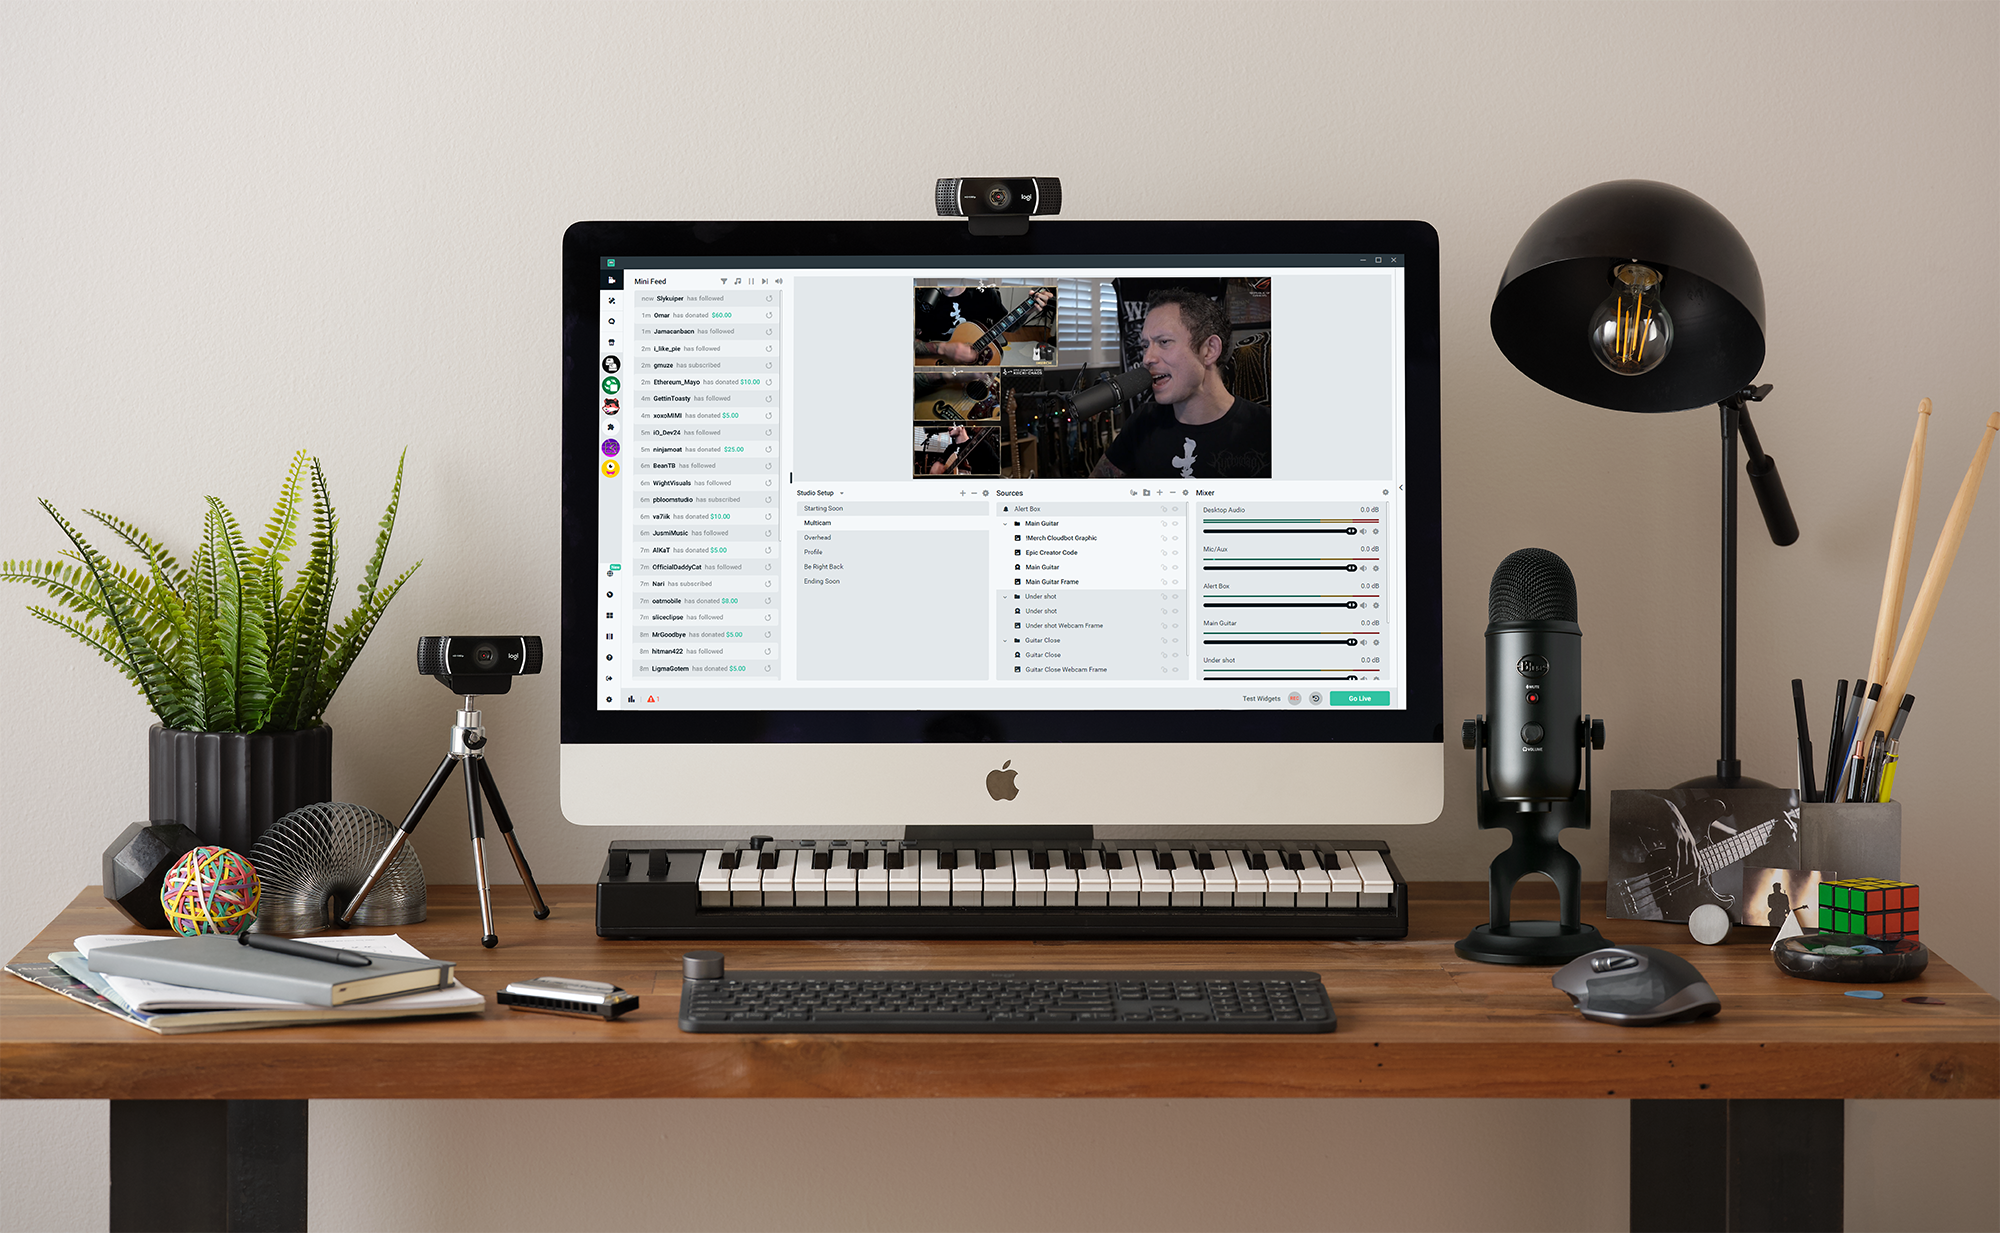 Live Streaming Software Streamlabs Obs Officially Comes To Macos In Beta 9to5mac